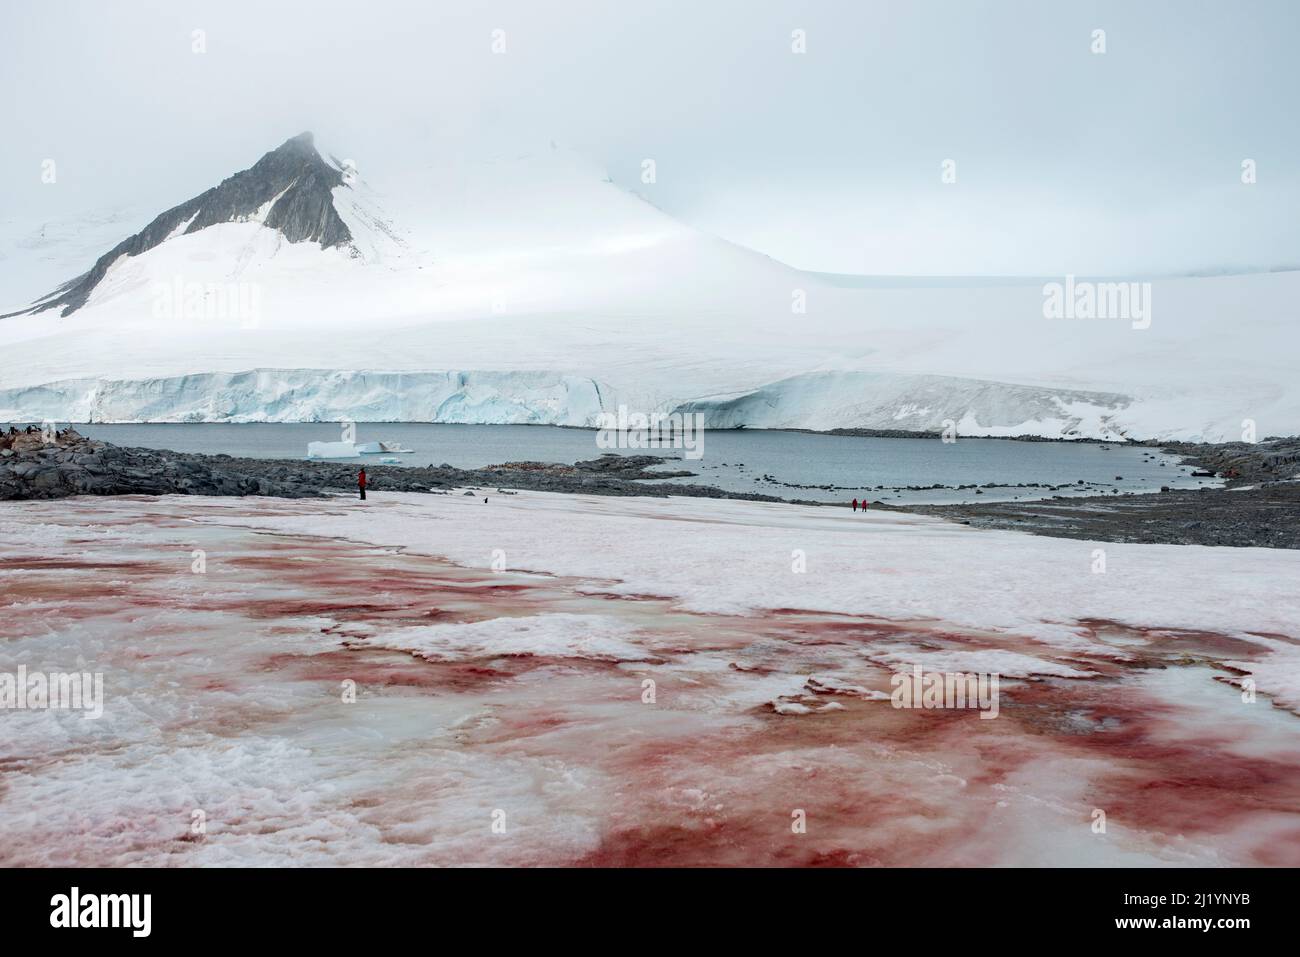 Blood red snow and ice at Damoy point Antarctica caused by algae Chlamydomonas nivalis a possible sign of climate change Stock Photo